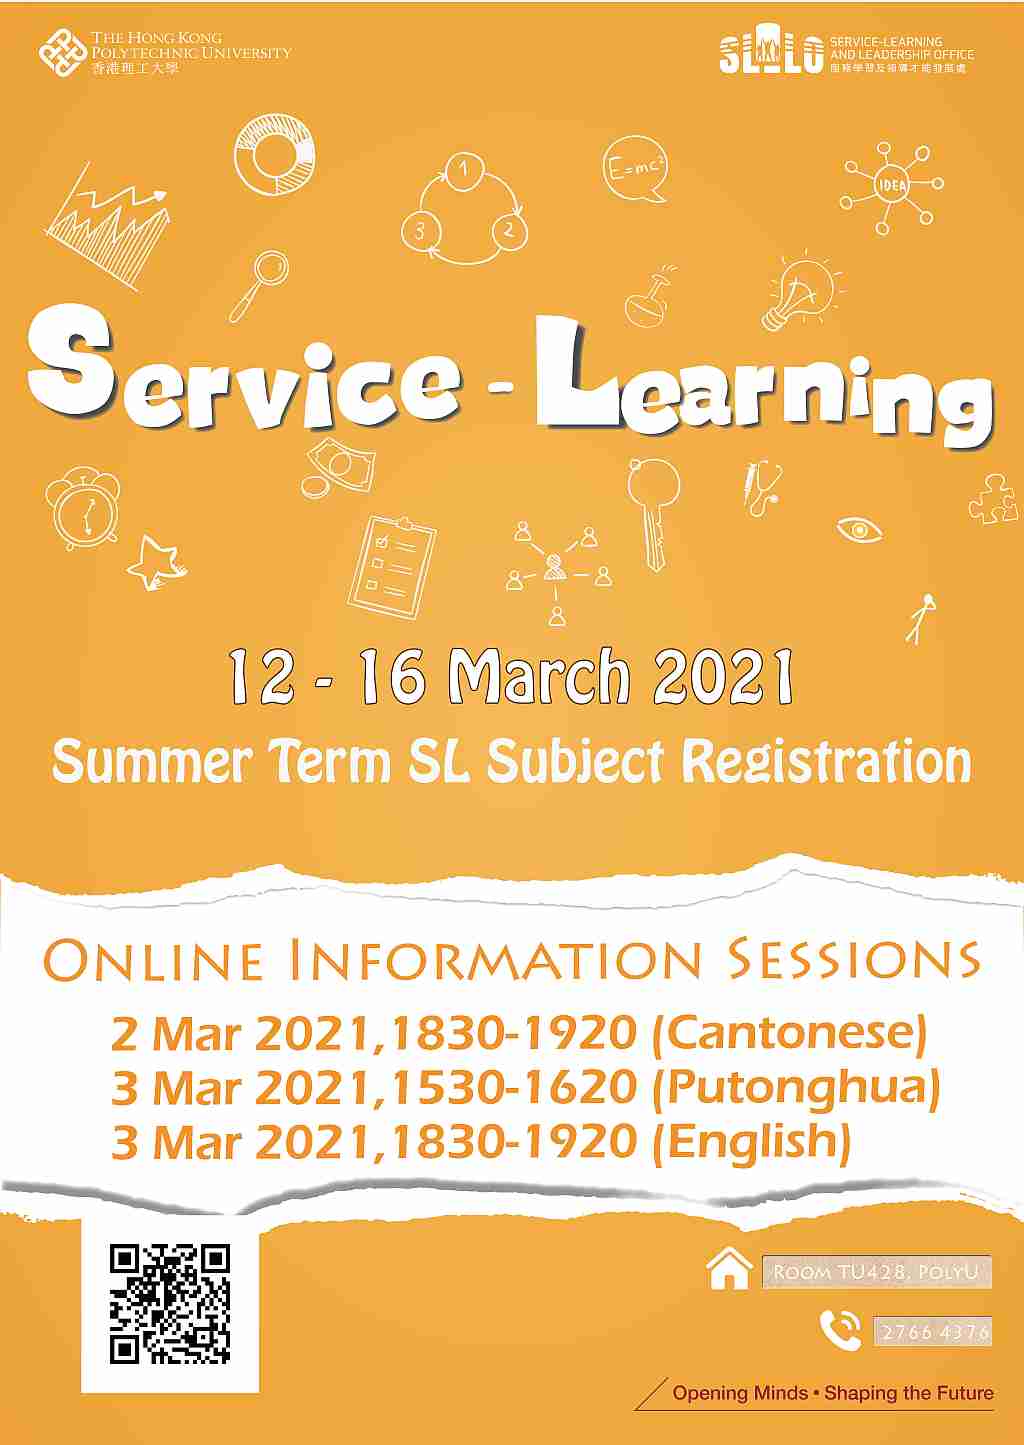 INFORMATION SESSIONS